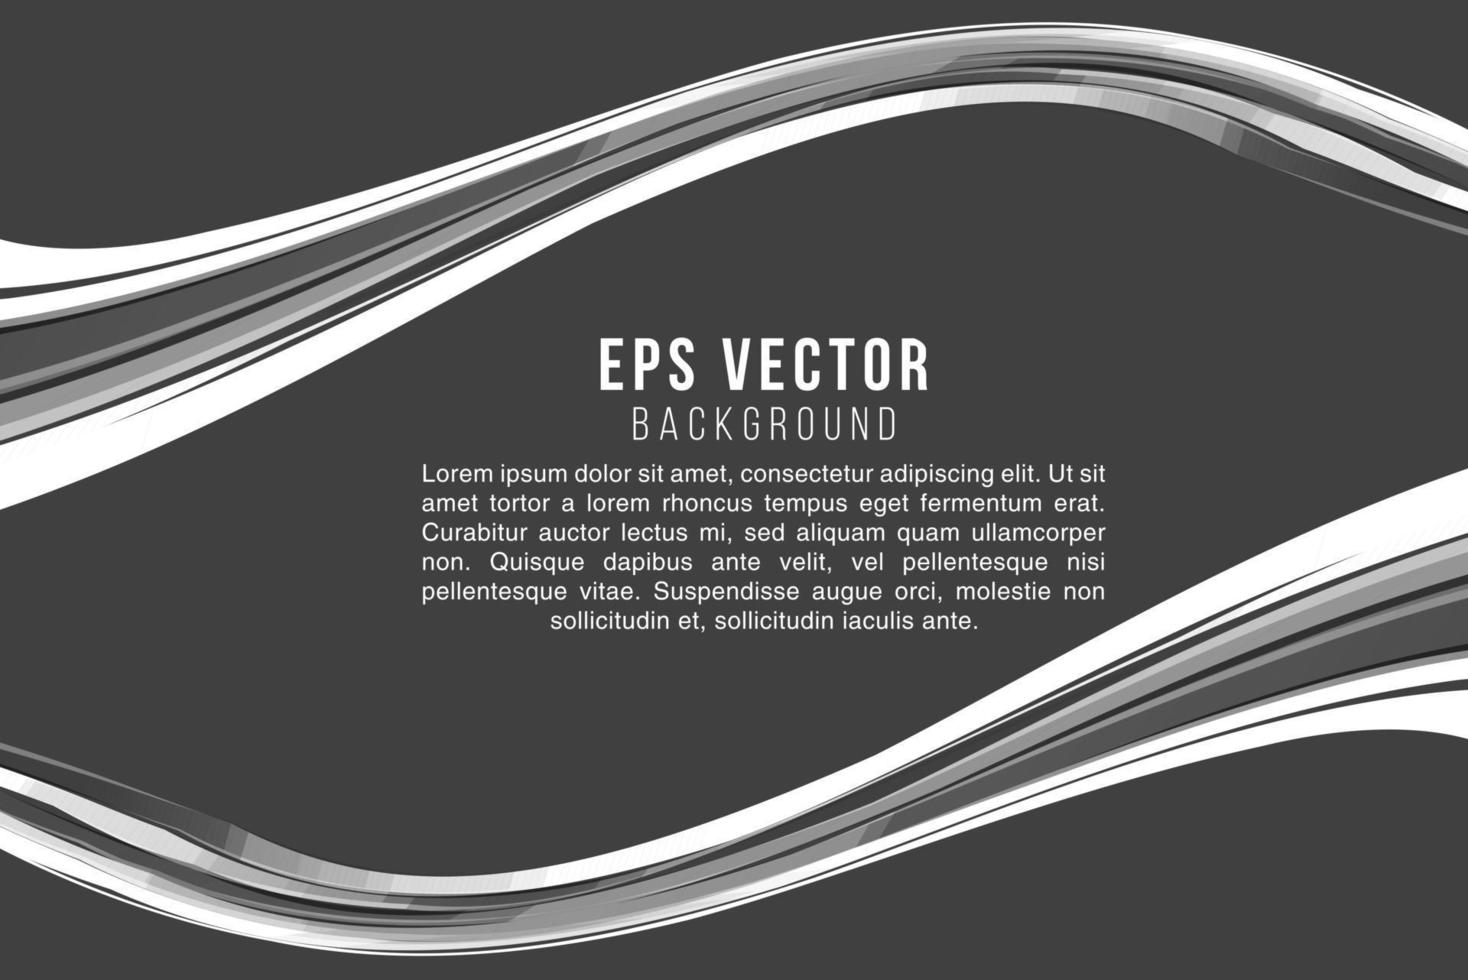 Monochrome abstract background black, white and gray eps vector